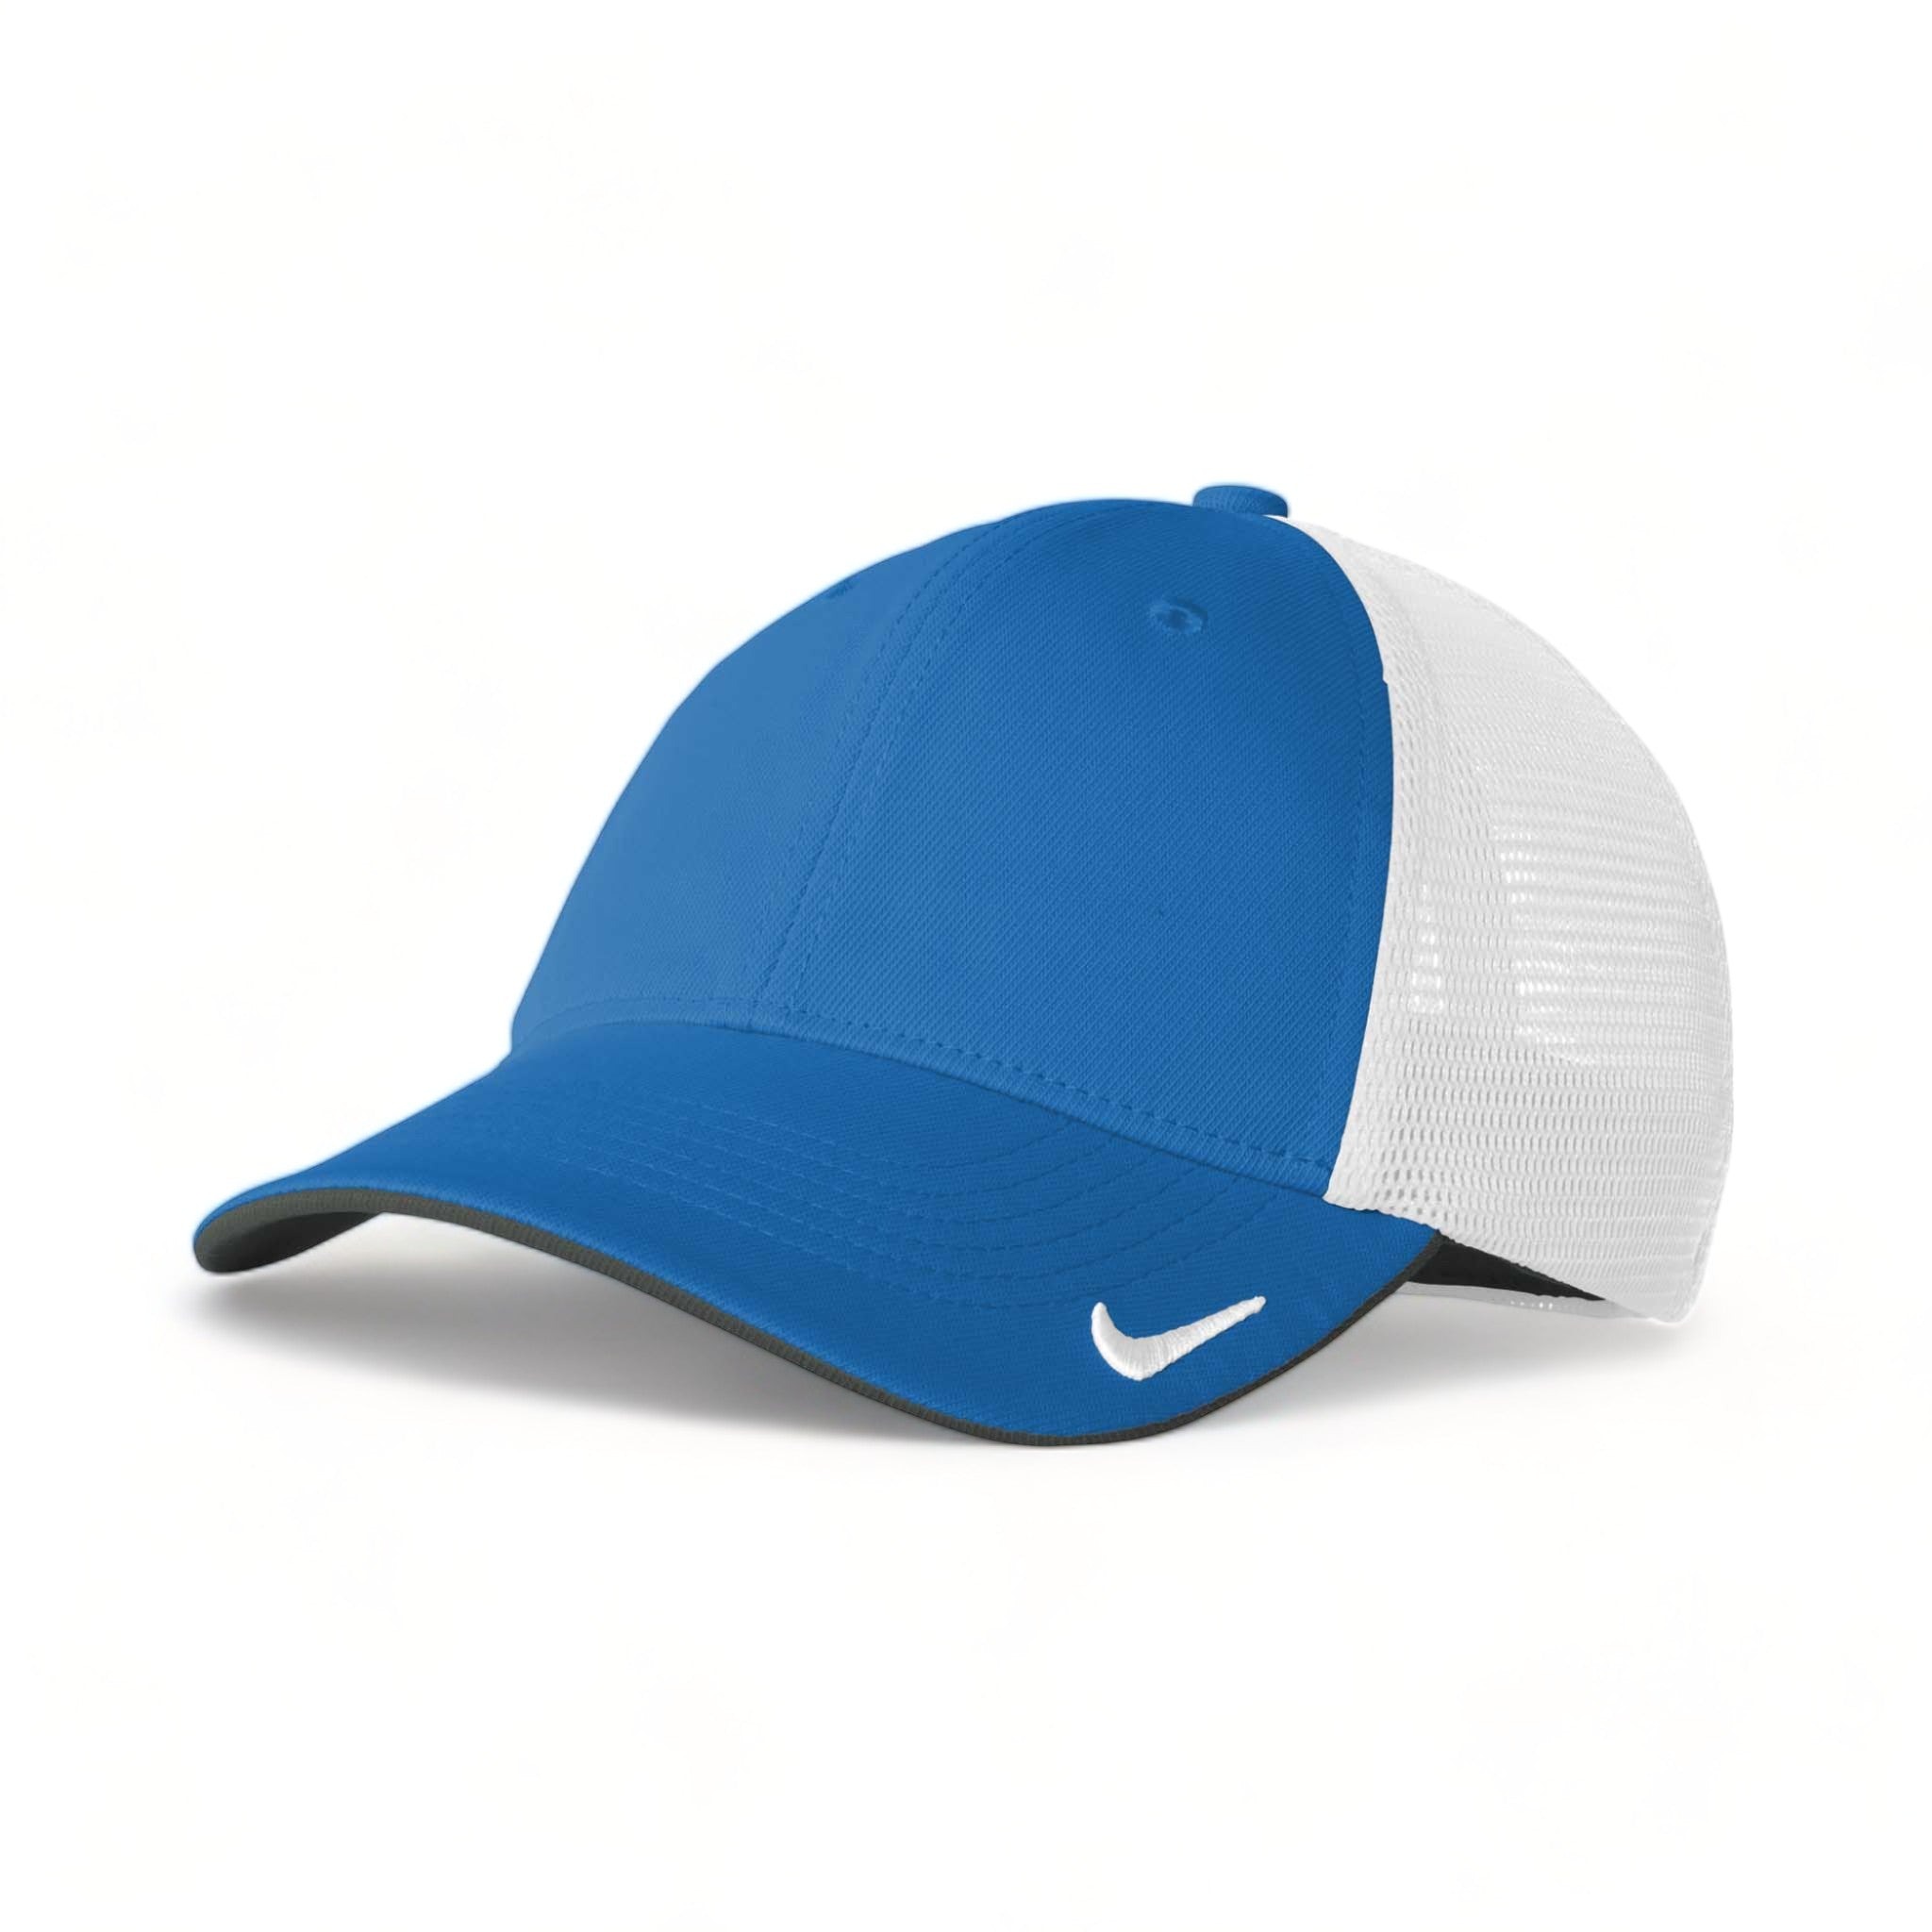 Side view of Nike NKFB6448 custom hat in gym blue and white